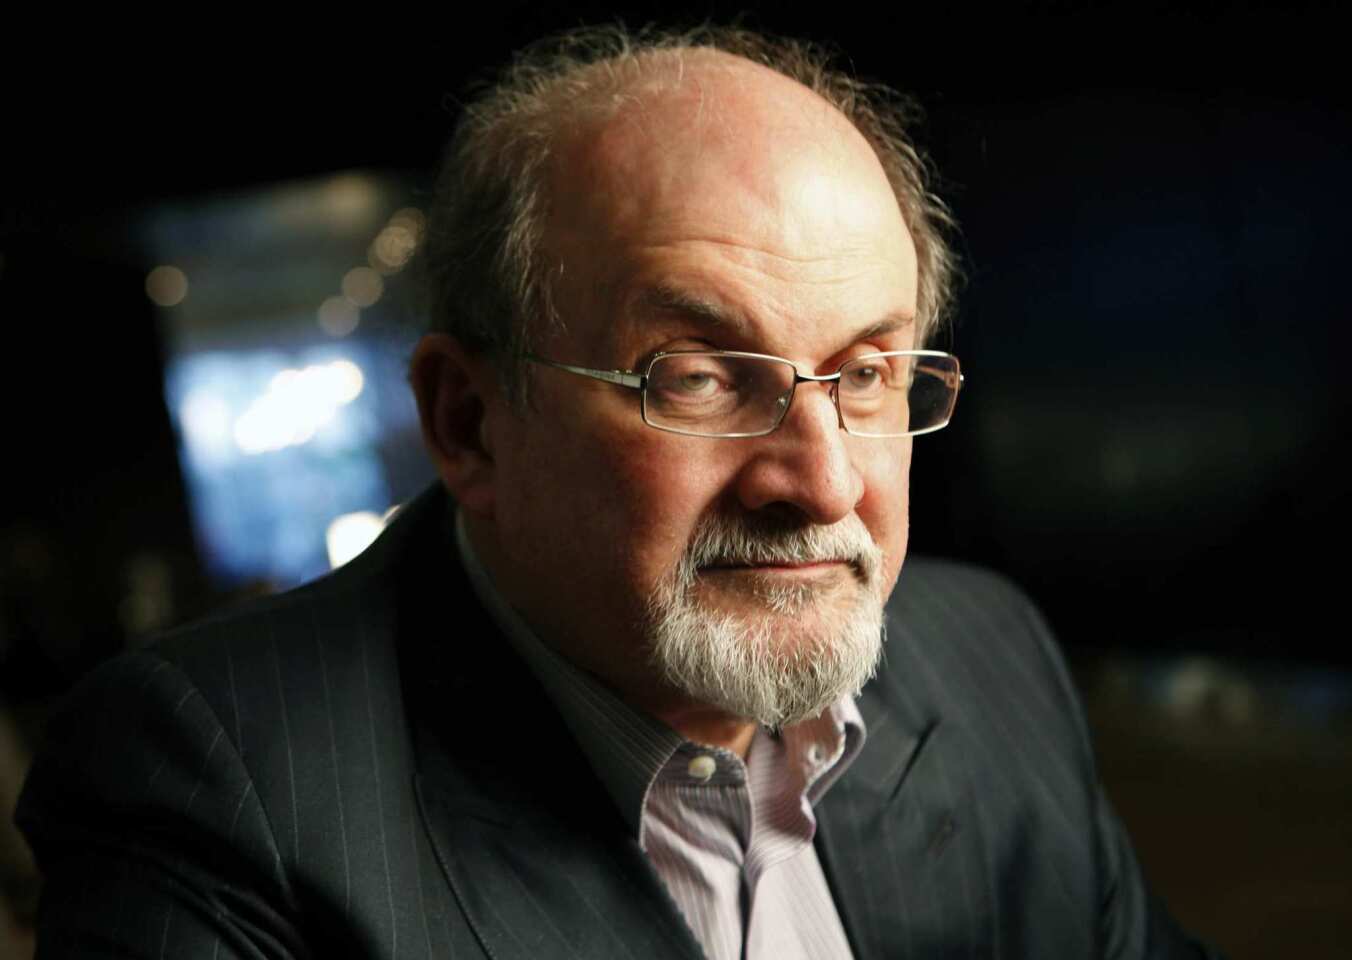 Salman Rushdie's book "Midnight's Children" is now a movie that's part of the Toronto Film Festival.